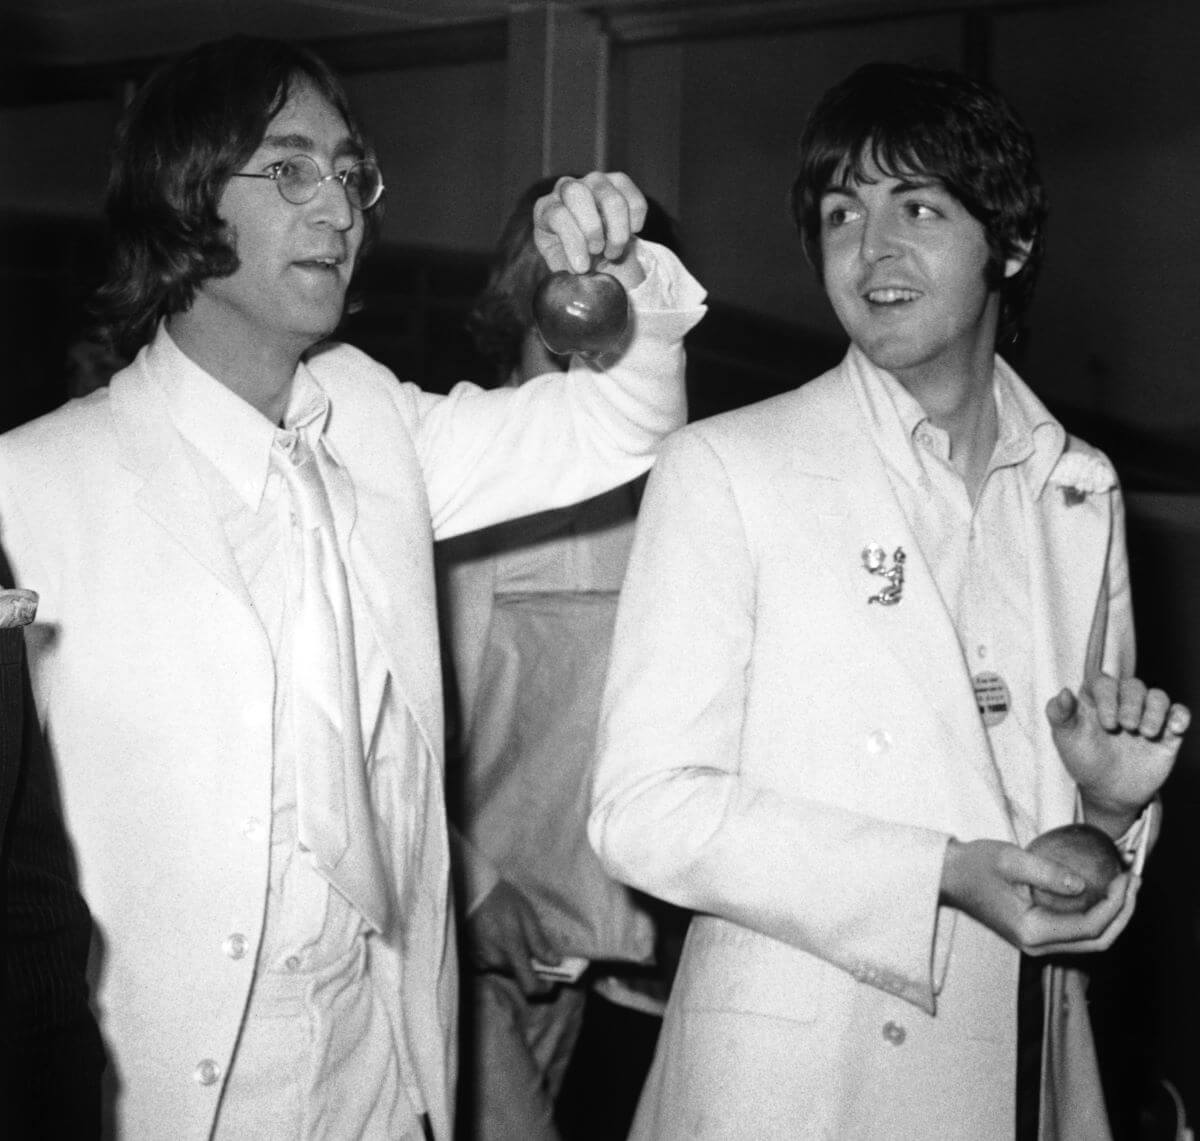 A black and white picture of Paul McCartney and John Lennon walking together. They both wear white suits and hold apples.